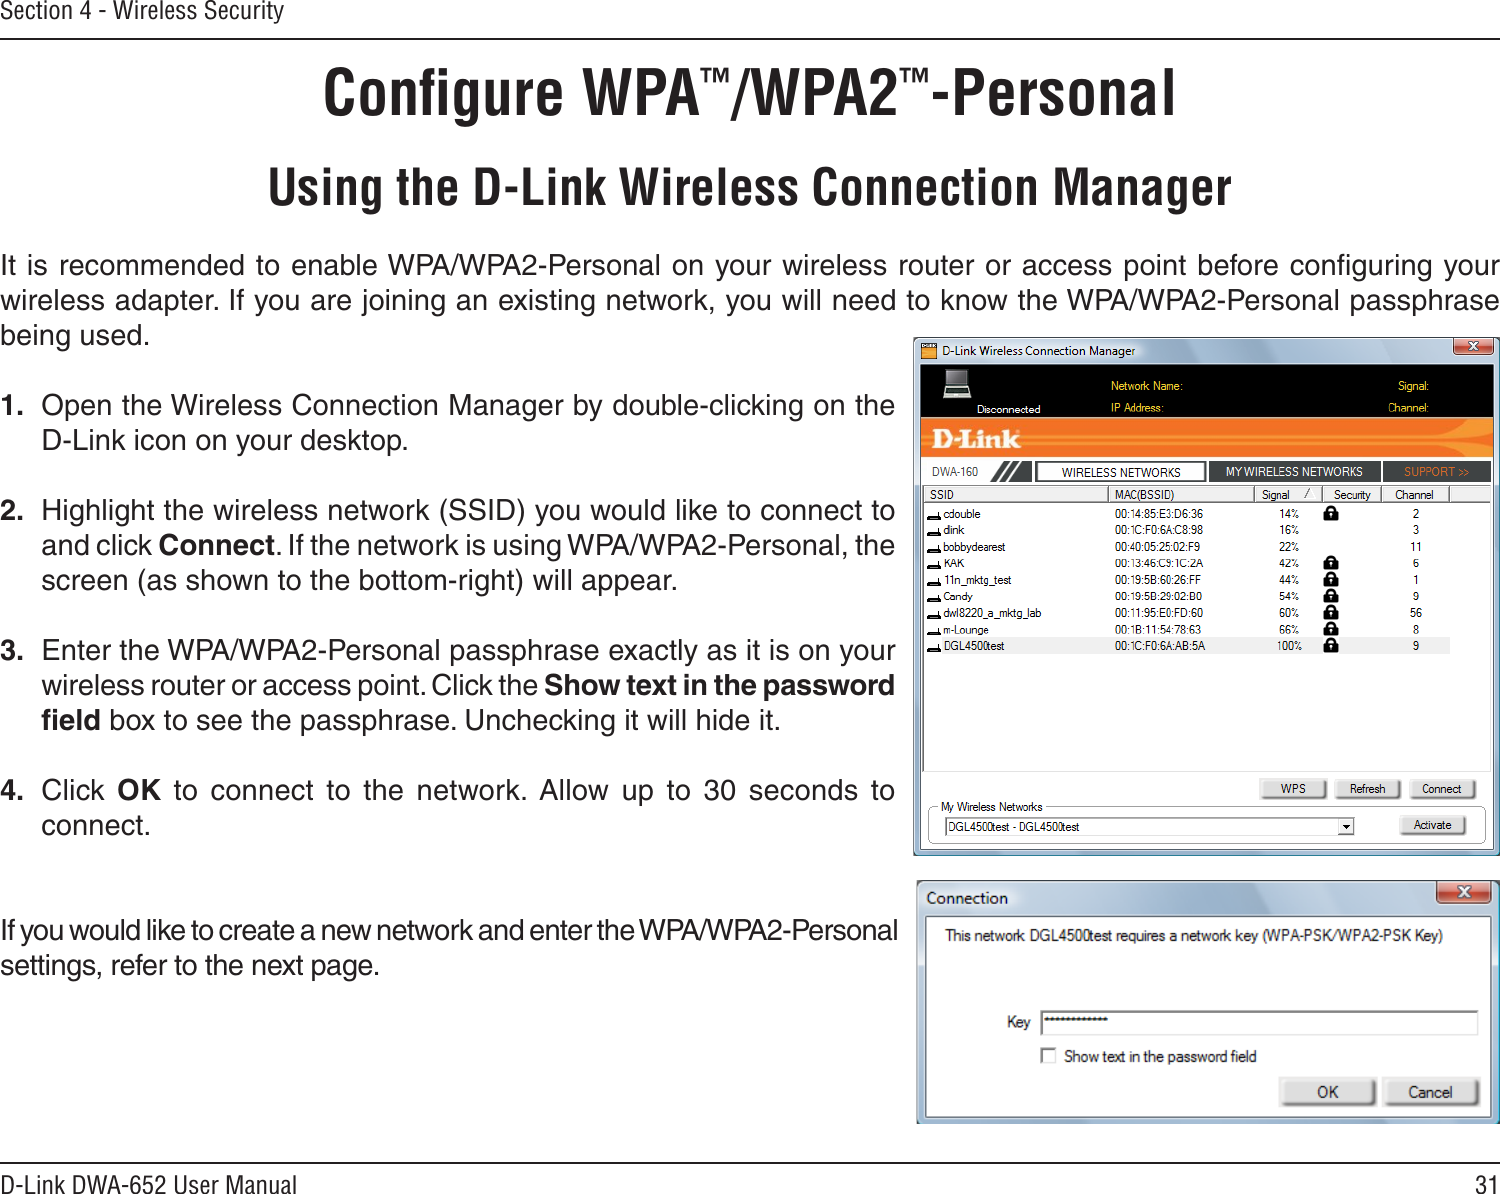 31D-Link DWA-652 User ManualSection 4 - Wireless SecurityConﬁgure WPA™/WPA2™-PersonalUsing the D-Link Wireless Connection ManagerIt is recommended to enable WPA/WPA2-Personal on your wireless router or access point before conﬁguring your wireless adapter. If you are joining an existing network, you will need to know the WPA/WPA2-Personal passphrase being used.1.  Open the Wireless Connection Manager by double-clicking on the D-Link icon on your desktop. 2.  Highlight the wireless network (SSID) you would like to connect to and click Connect. If the network is using WPA/WPA2-Personal, the screen (as shown to the bottom-right) will appear. 3.  Enter the WPA/WPA2-Personal passphrase exactly as it is on your wireless router or access point. Click the Show text in the password ﬁeld box to see the passphrase. Unchecking it will hide it.4.  Click  OK  to  connect  to  the  network.  Allow  up  to  30  seconds  to connect.If you would like to create a new network and enter the WPA/WPA2-Personal settings, refer to the next page.